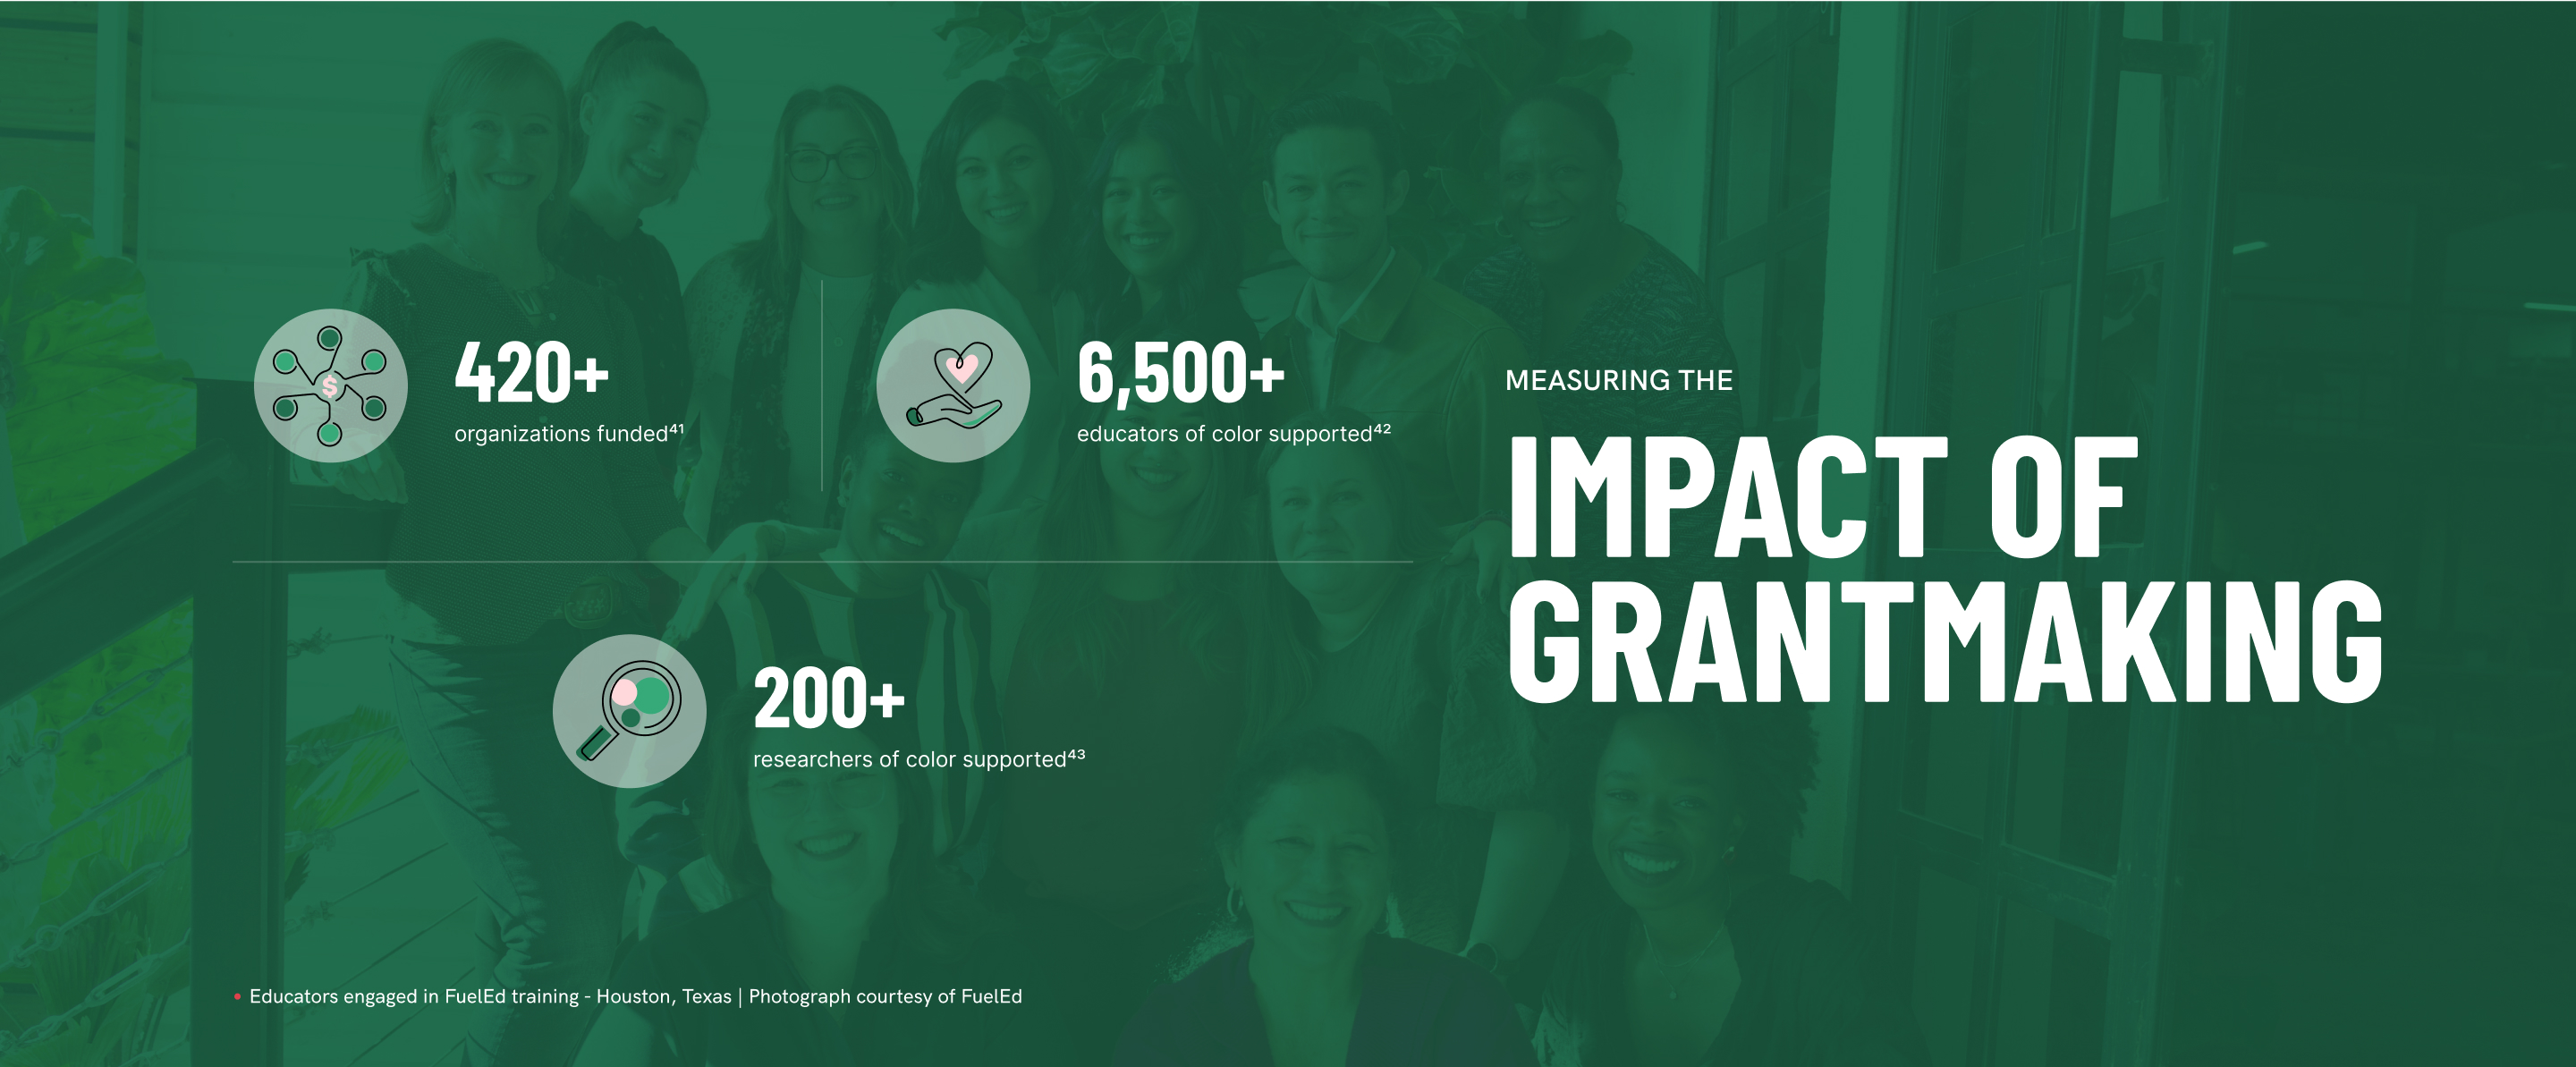 Infographic - Measuring the Impact of Grantmaking. CZI has funder over 420 organizations with over 6500 educators of color and over 200 researchers of color supported.